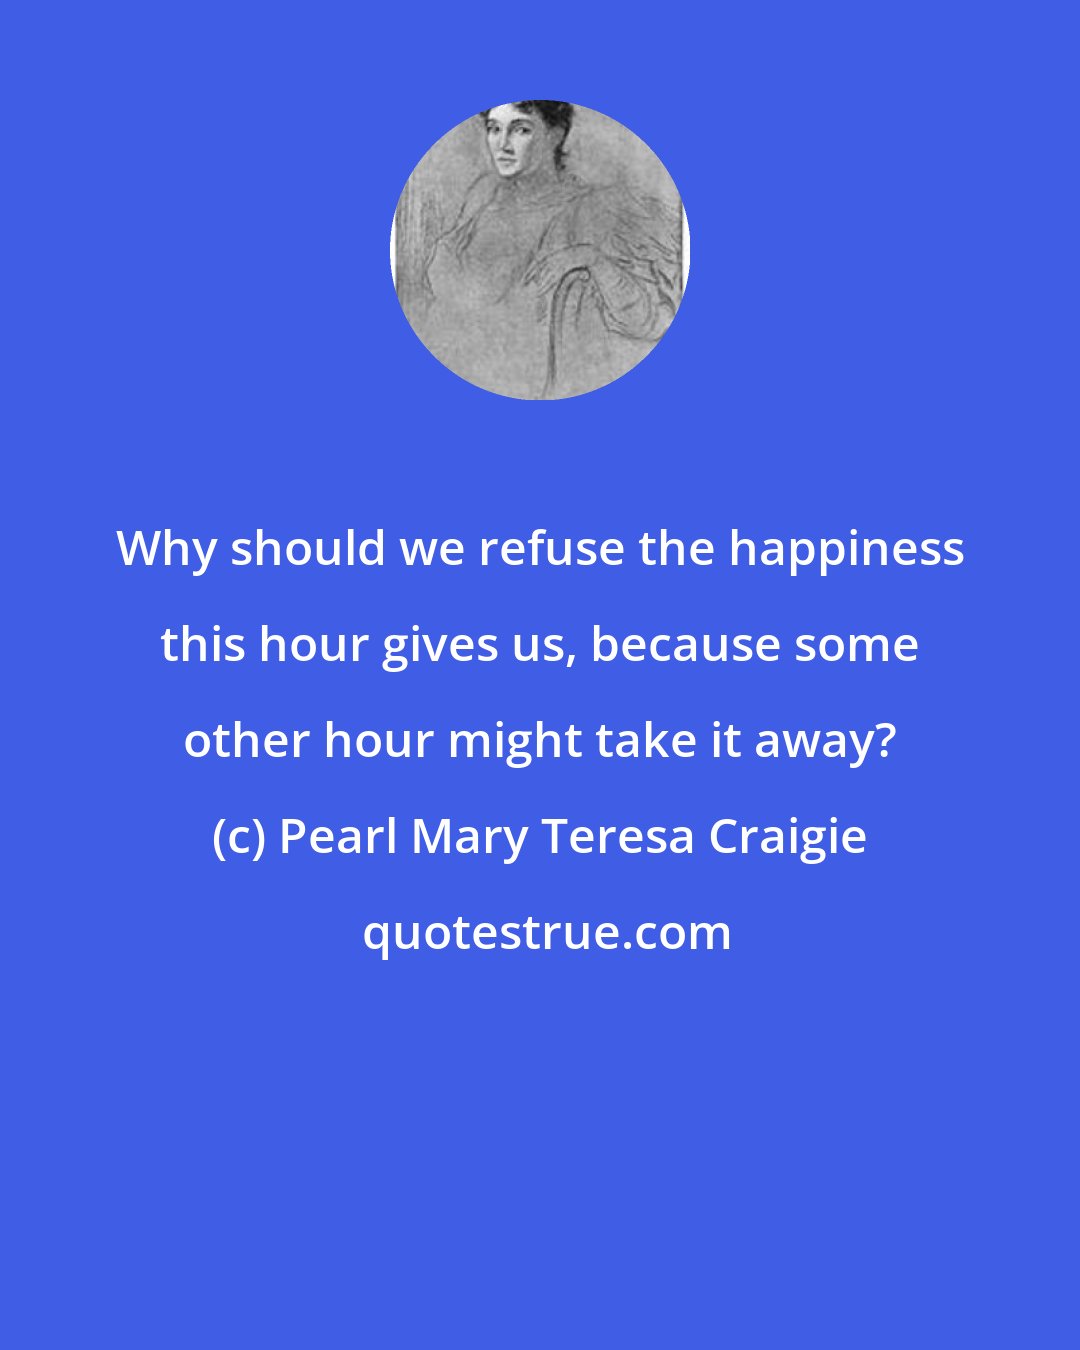 Pearl Mary Teresa Craigie: Why should we refuse the happiness this hour gives us, because some other hour might take it away?